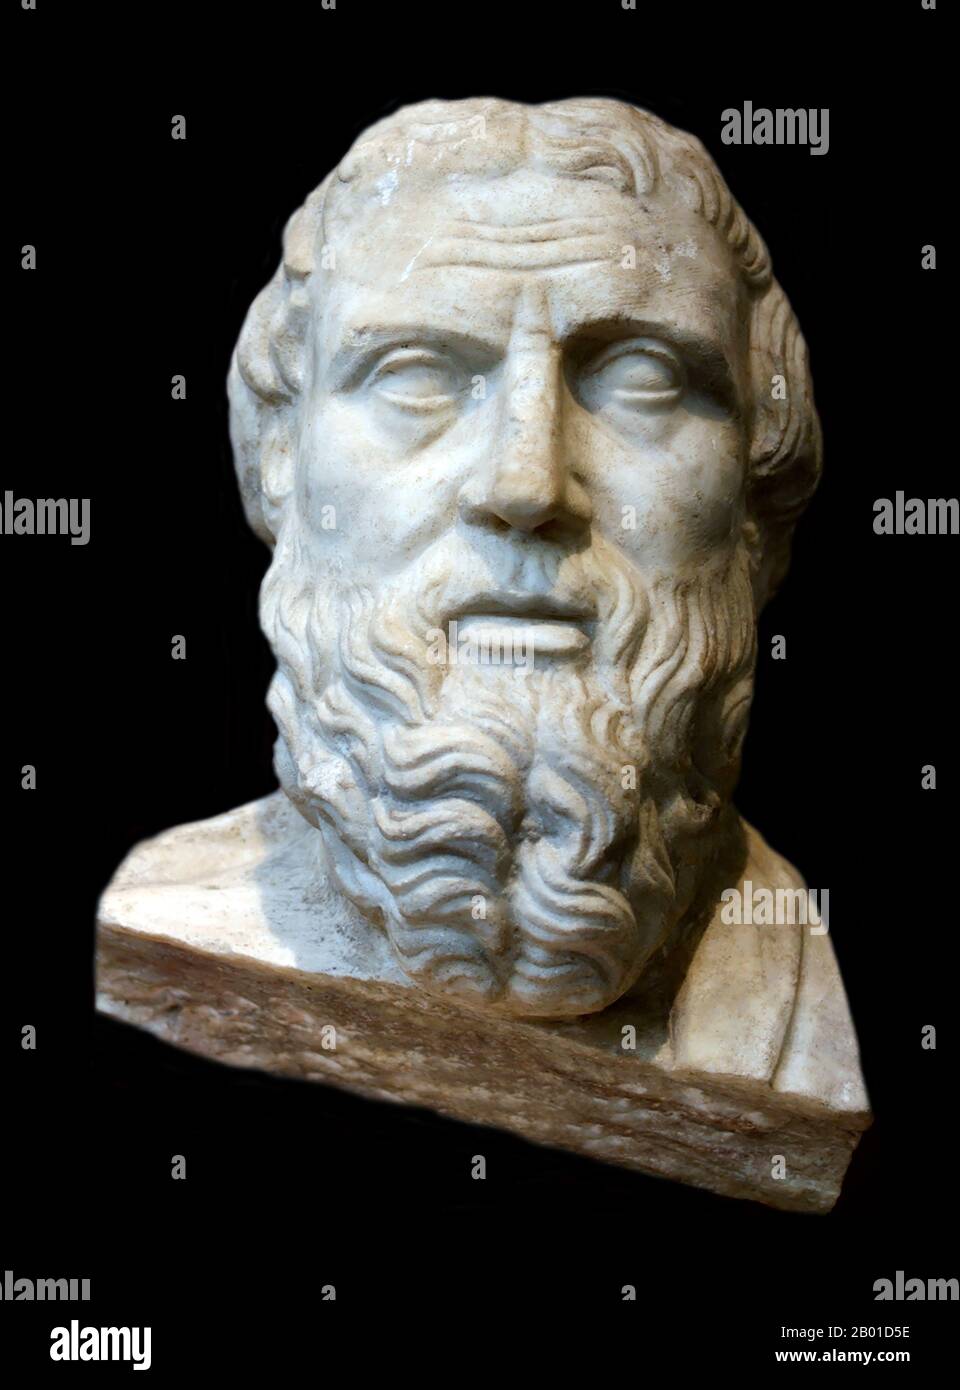 Greece/Turkey: Herodotus, the 'Father of History' (c. 484 - c. 425 BCE). Roman copy of a Greek marble bust, early 4th century BCE.  Herodotus (Greek: Hēródotos) was an ancient Greek historian who was born in Halicarnassus, Caria (modern day Bodrum, Turkey) and lived in the 5th century BCE .  He has been called the 'Father of History' since he was the first historian known to collect his materials systematically, test their accuracy to a certain extent and arrange them in a well-constructed and vivid narrative. Stock Photo